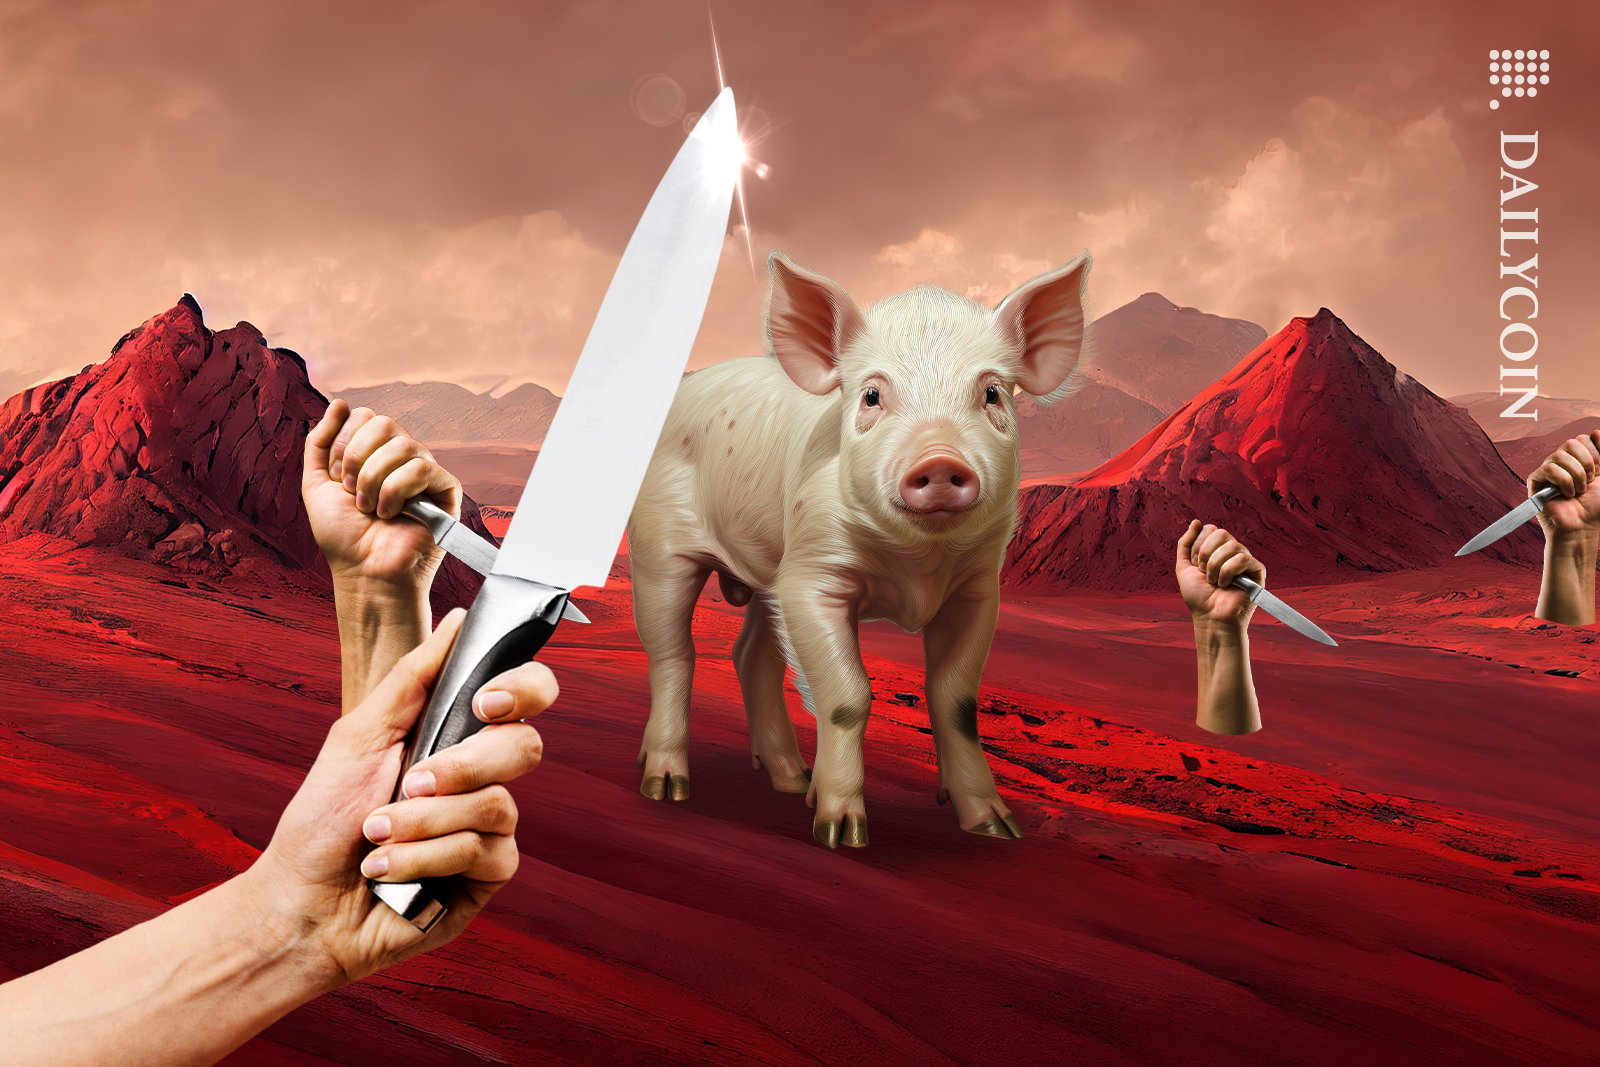 Hands with knifes threatening the pig on a red land.